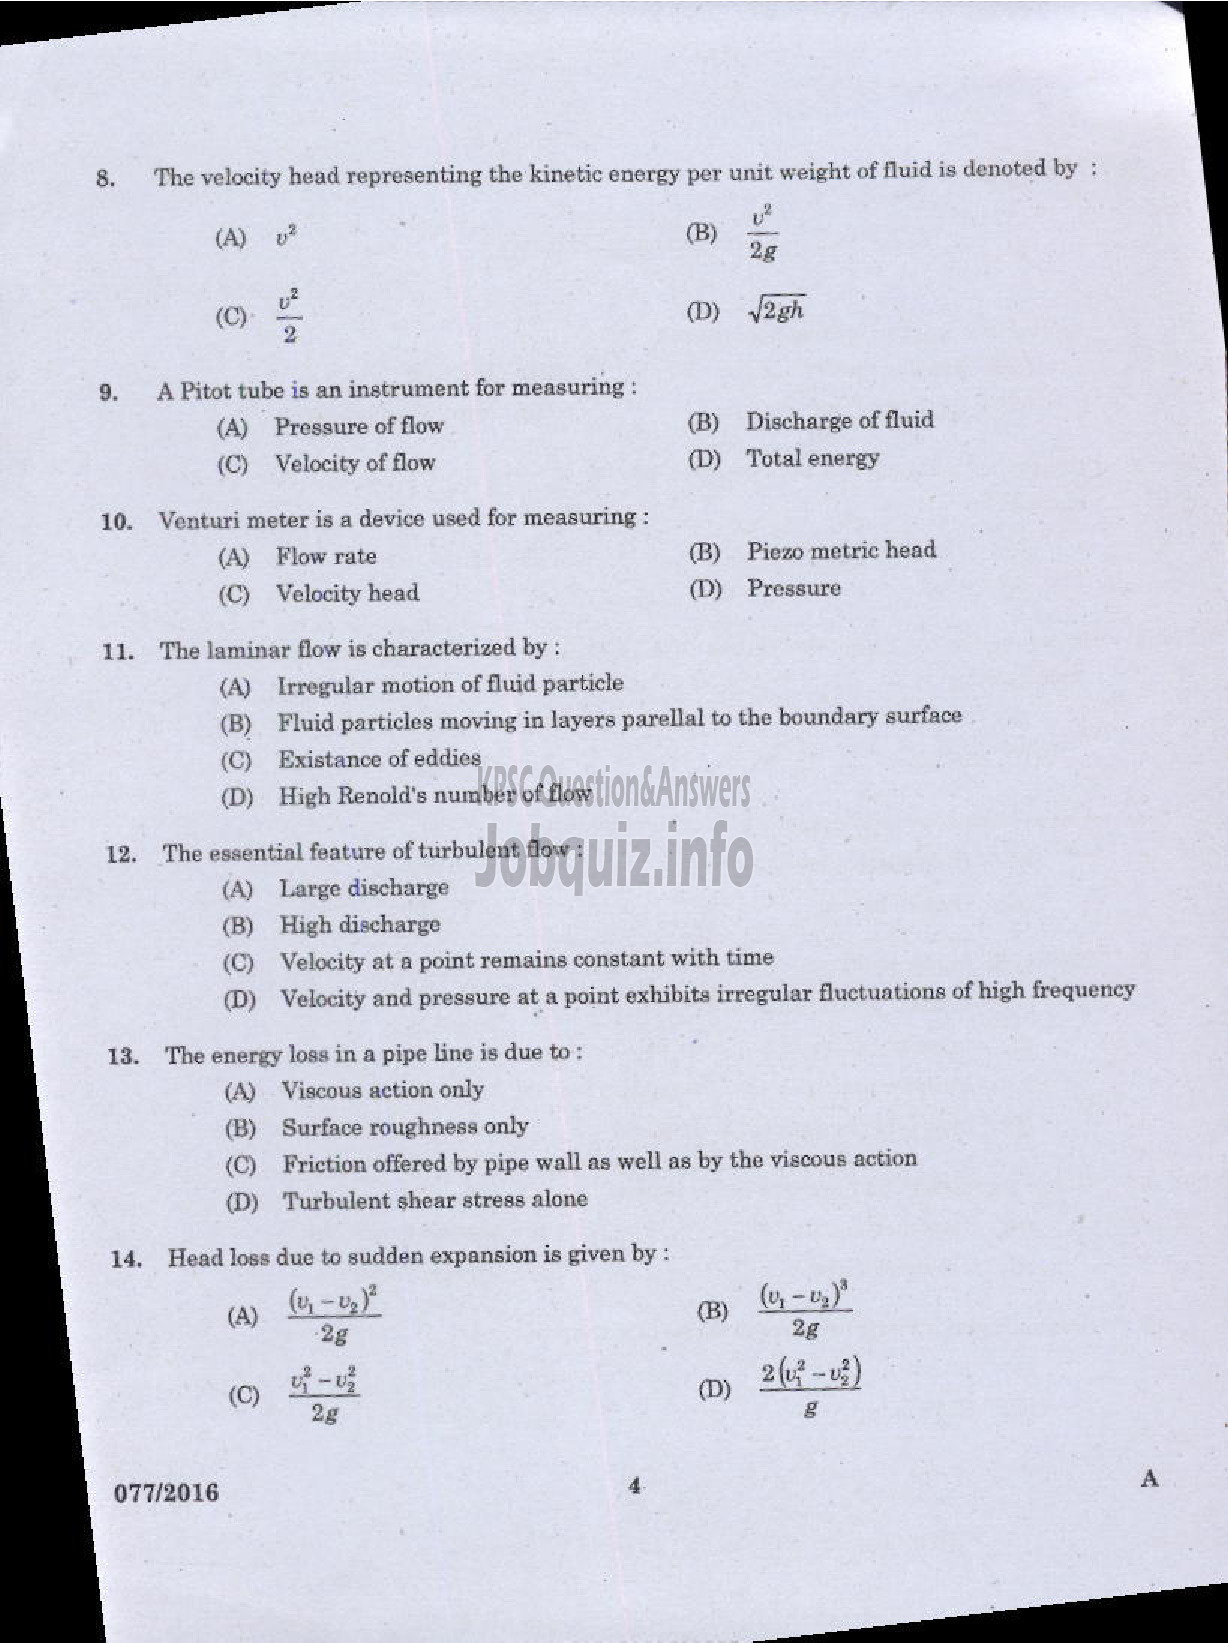 Kerala PSC Question Paper - VOCATIONAL INSTRUCTOR IN MECHANICAL SERVICING AGRO MACHINERY VHSE-2